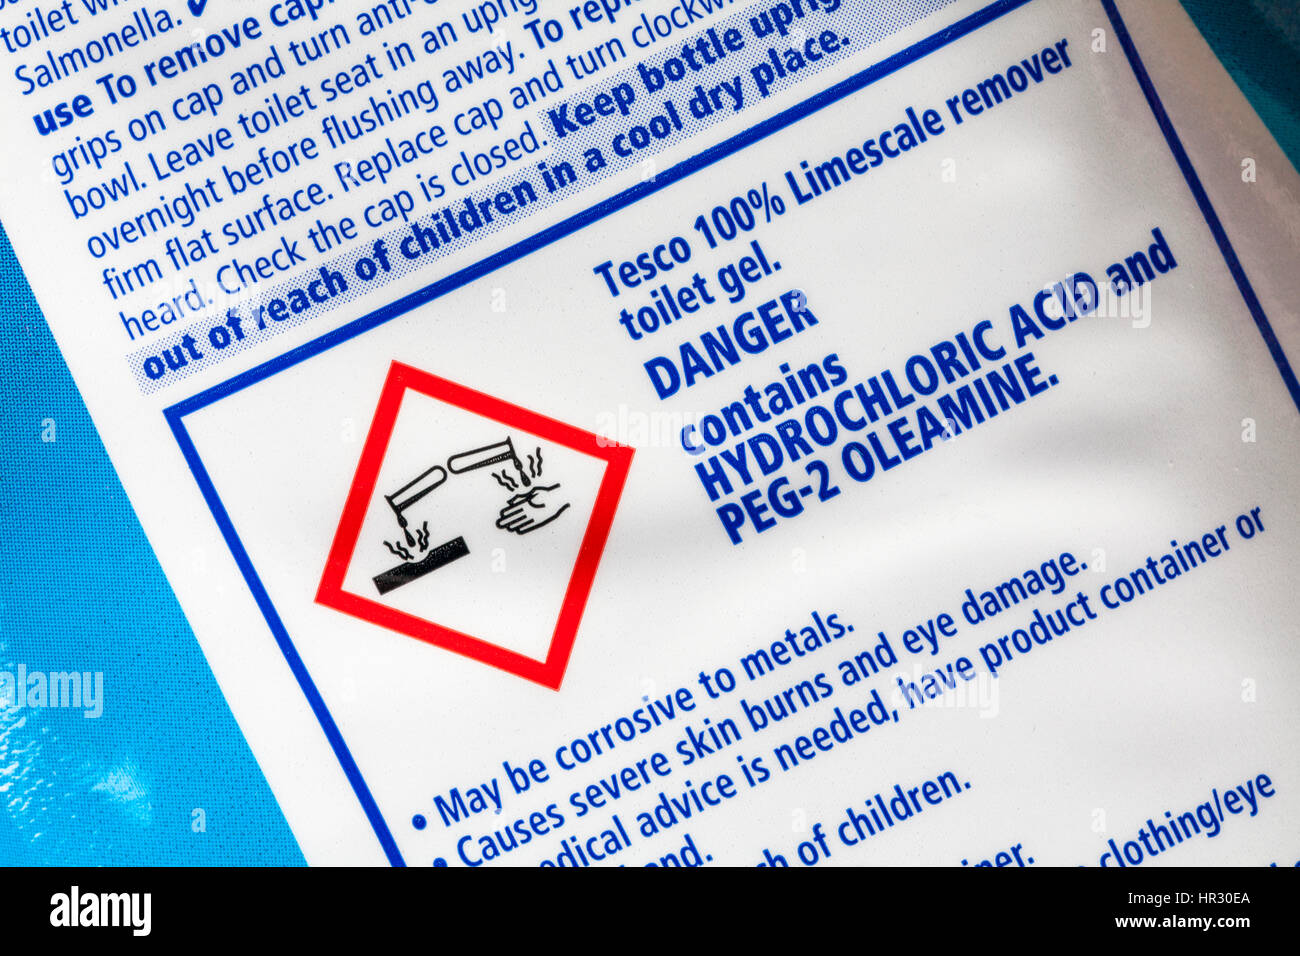 Label on back of Tesco 100% limescale remover toilet gel - danger contains hydrochloric acid and PEG-2 oleamine Stock Photo